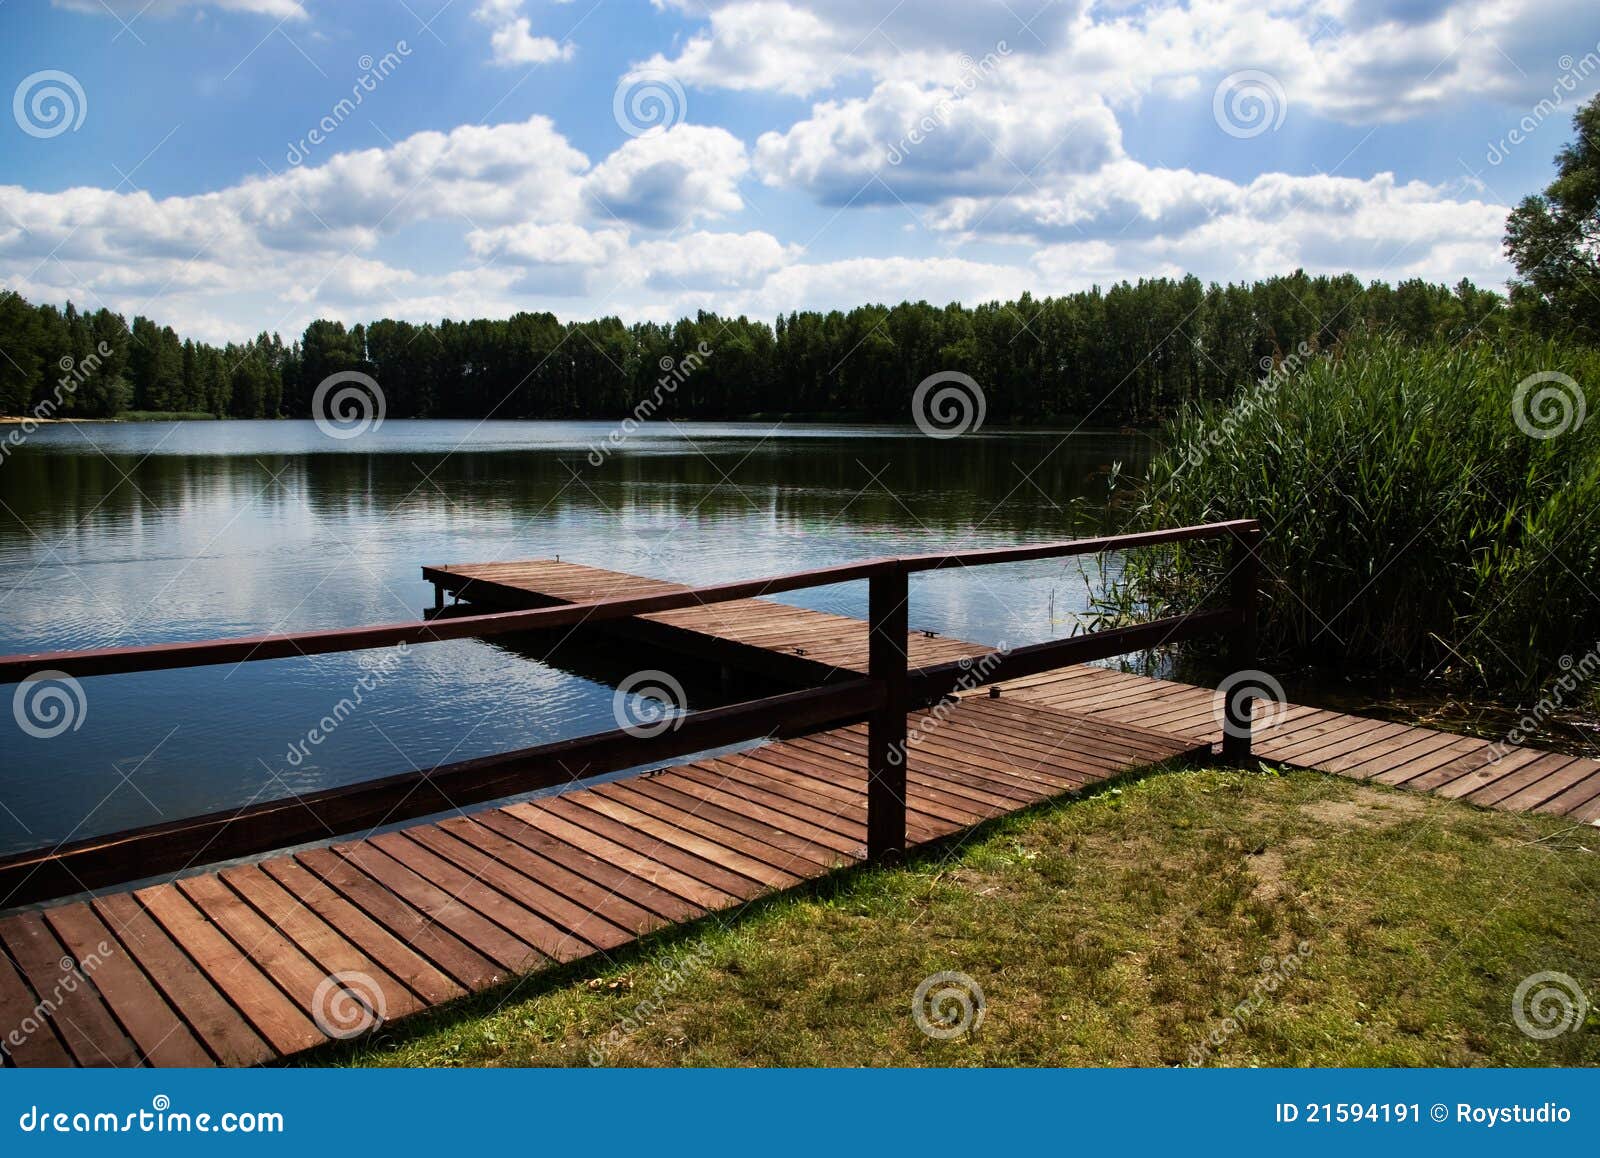 wooden dock, pier on a lake